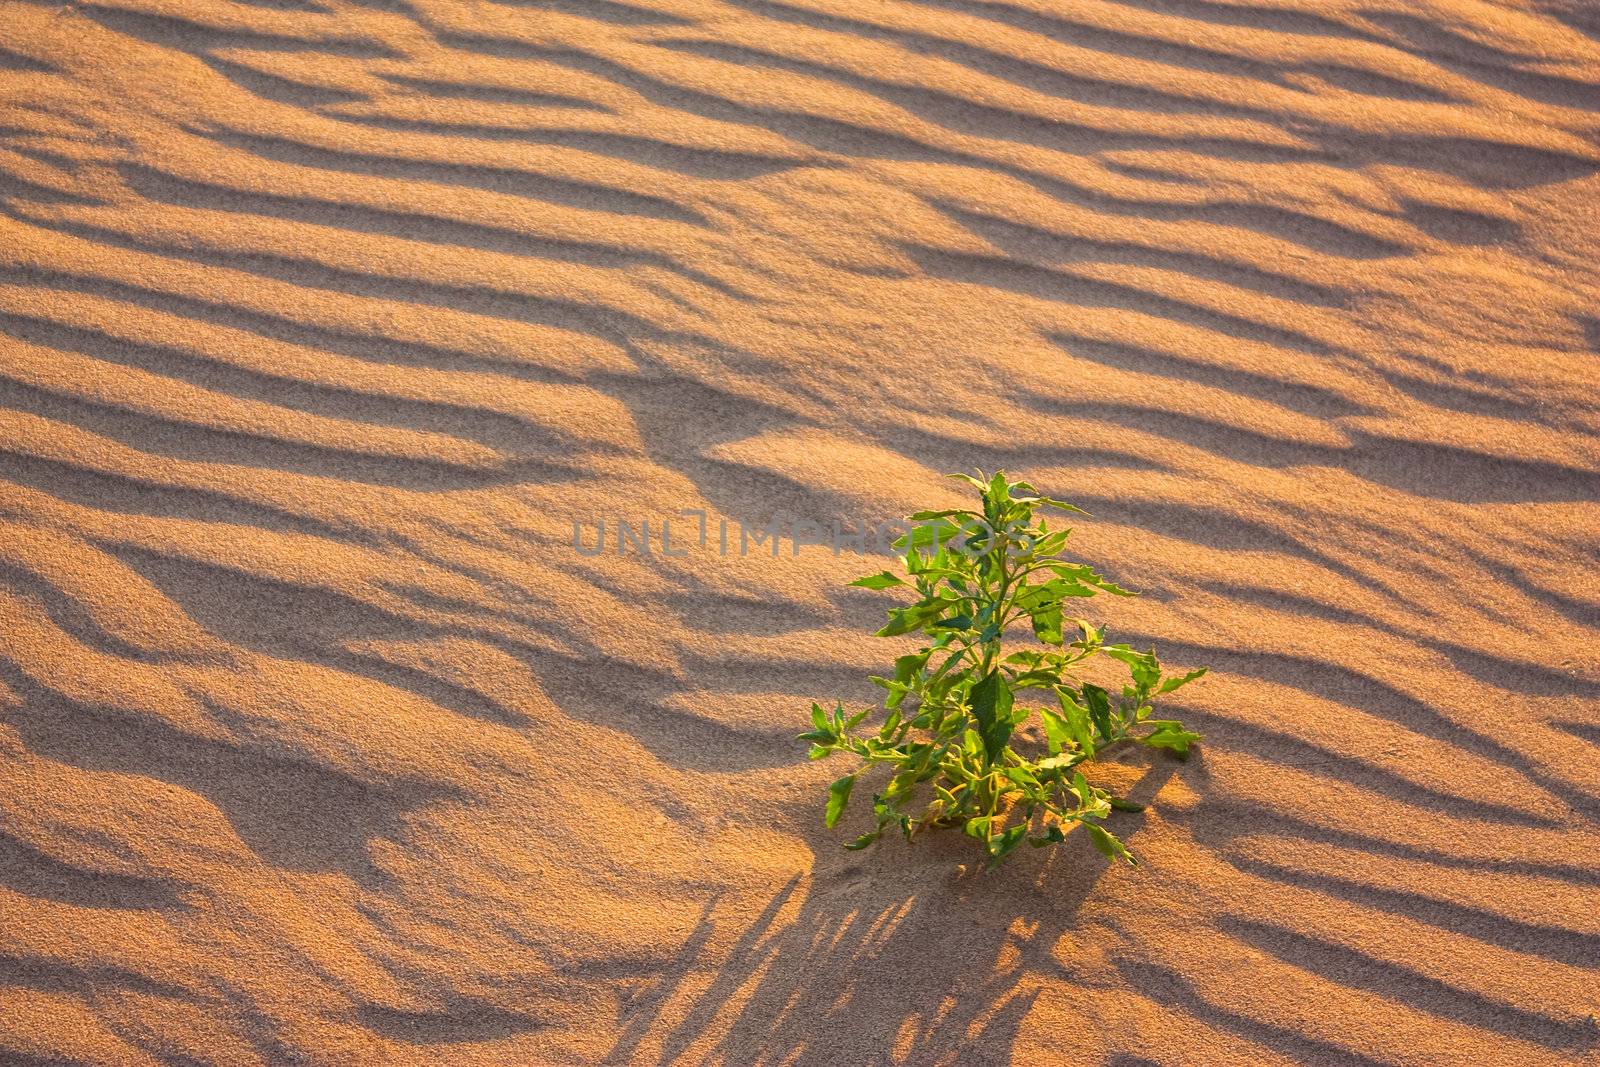 Lonely Flower in the sand at sunset by oleg_zhukov